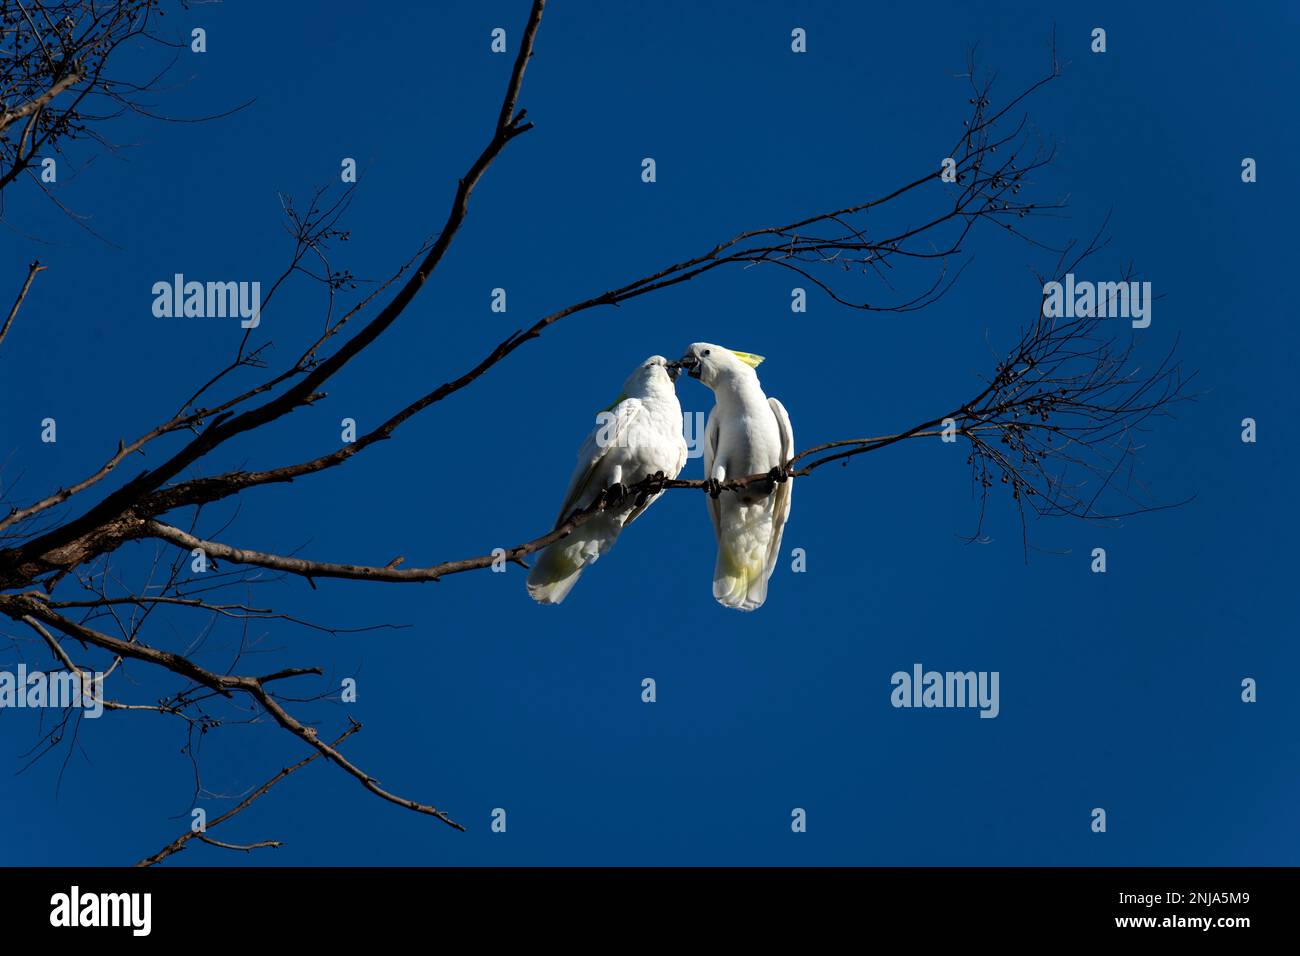 A pair of Sulphur-Crested Cockatoos (Cacatua galerita) expressing love on the branch of a tree in Sydney, NSW, Australia (Photo by Tara Chand Malhotra Stock Photo